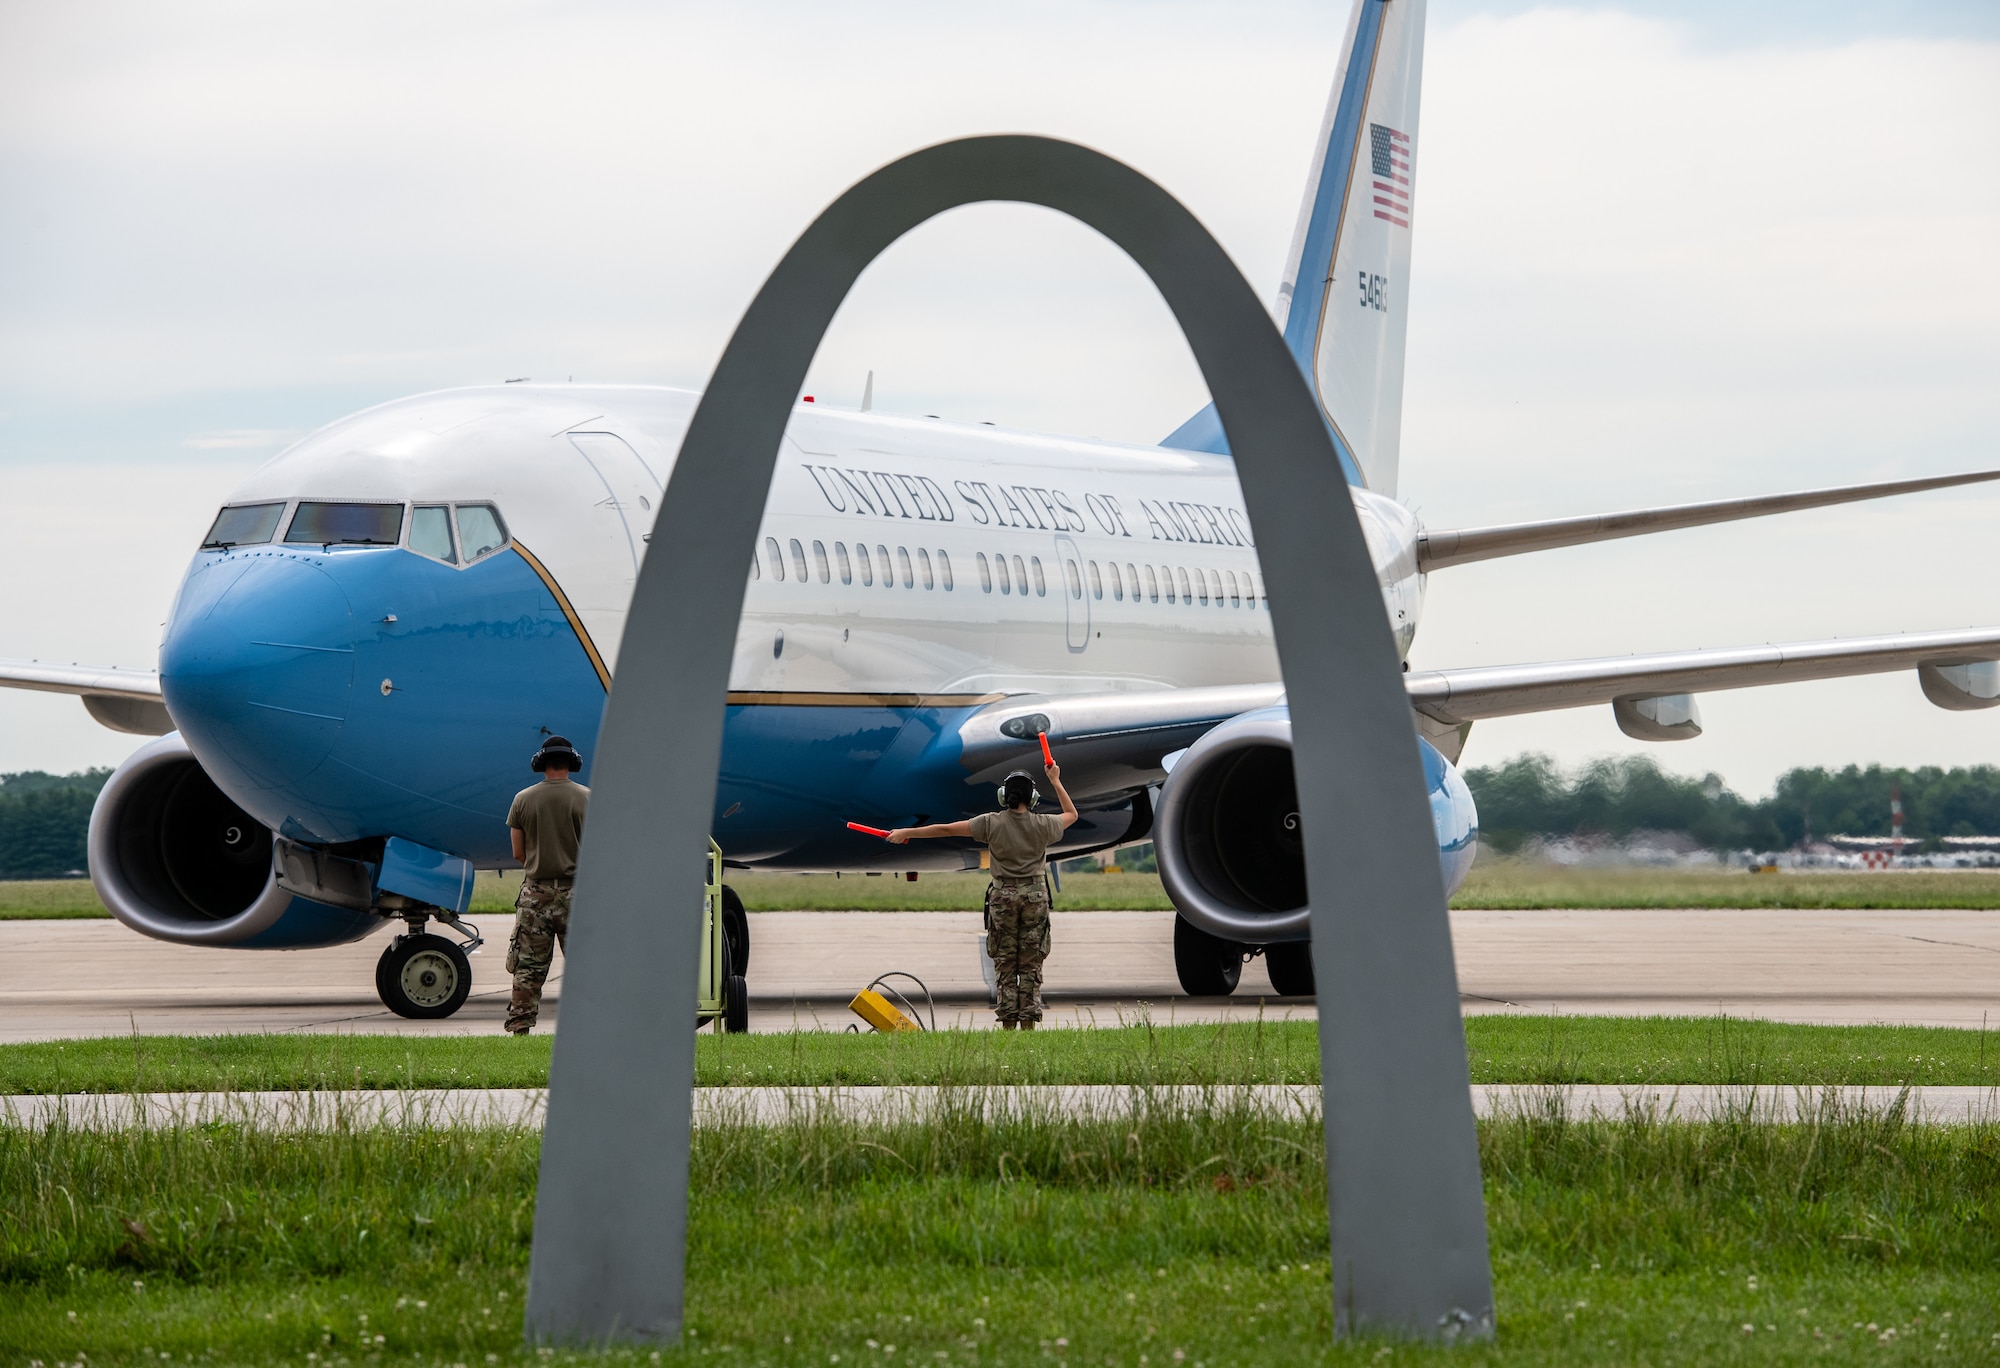 Senior Airman Janice Williams, 932nd Maintenance Squadron crew chief, performs a pre-flight inspection and launches the aircraft June 30, 2021, Scott Air Force Base, Illinois. (U.S. Air Force photo by Christopher Parr)